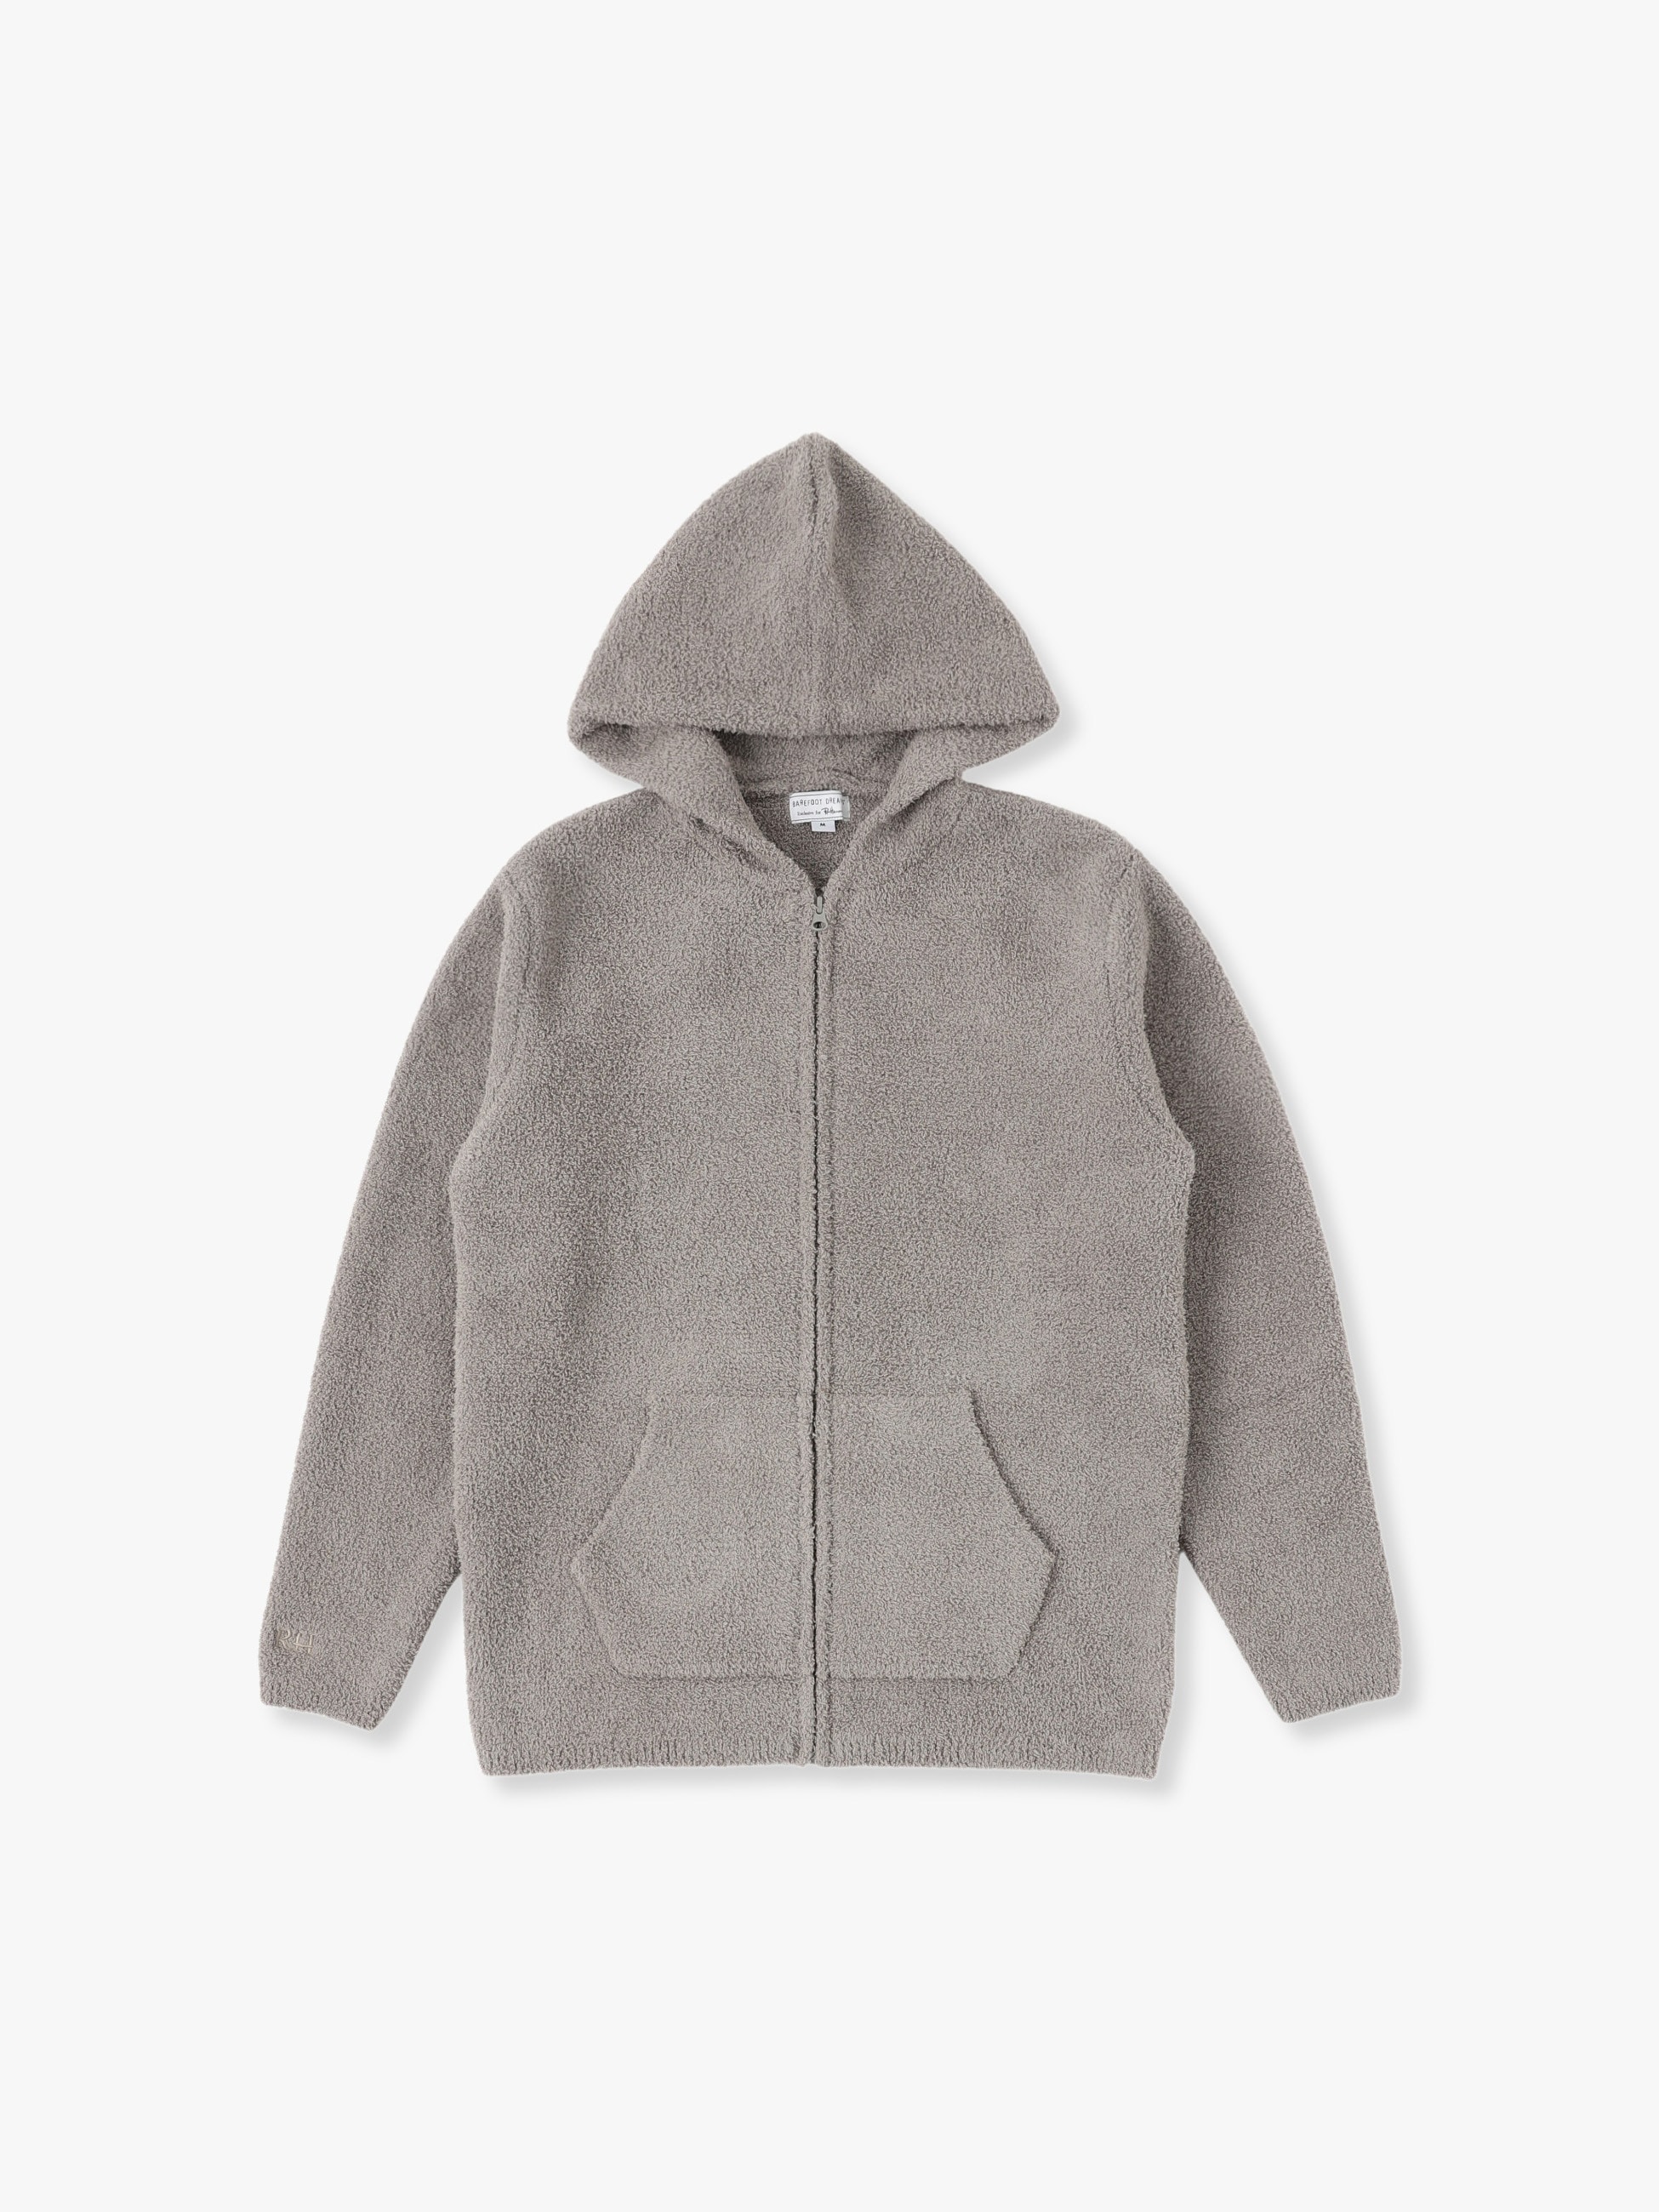 Double Jacquard Solid Hoodie｜BAREFOOT DREAMS for Ron Herman ...